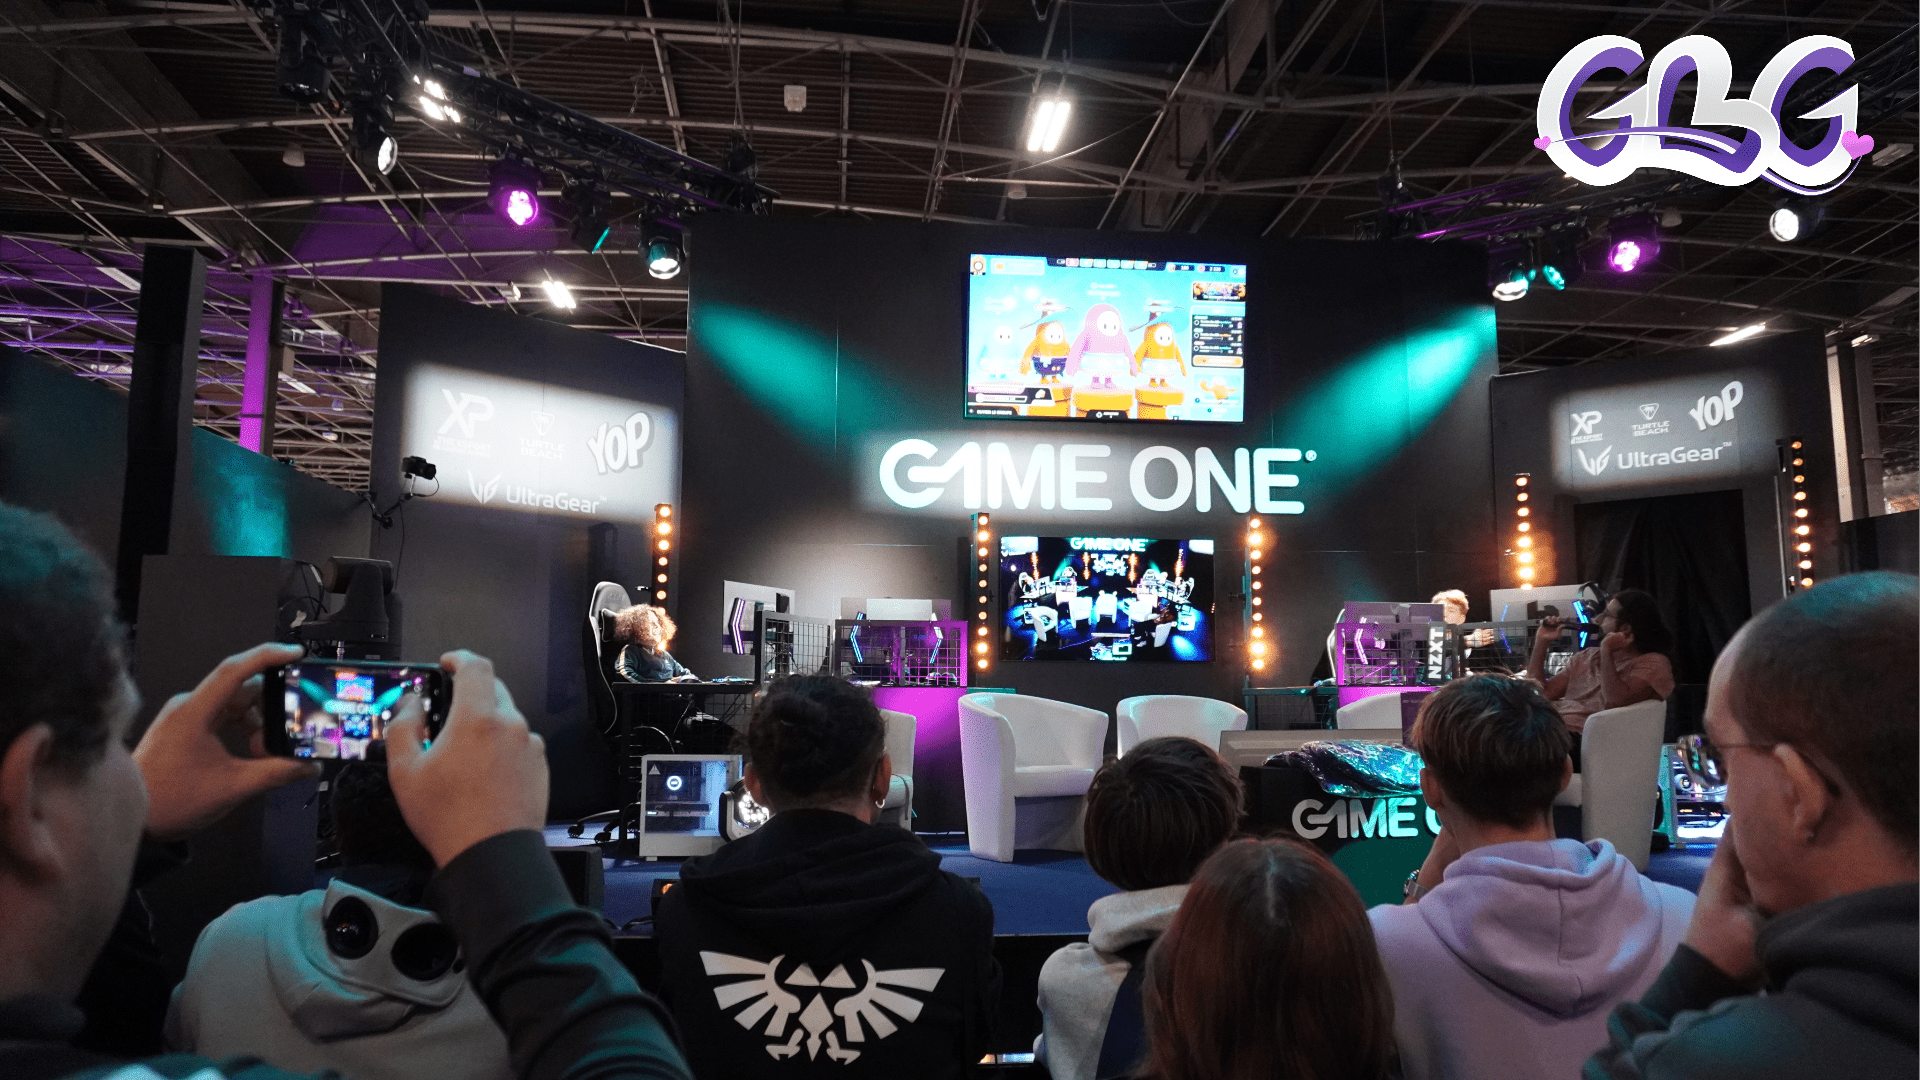 Le stand de "Game One"